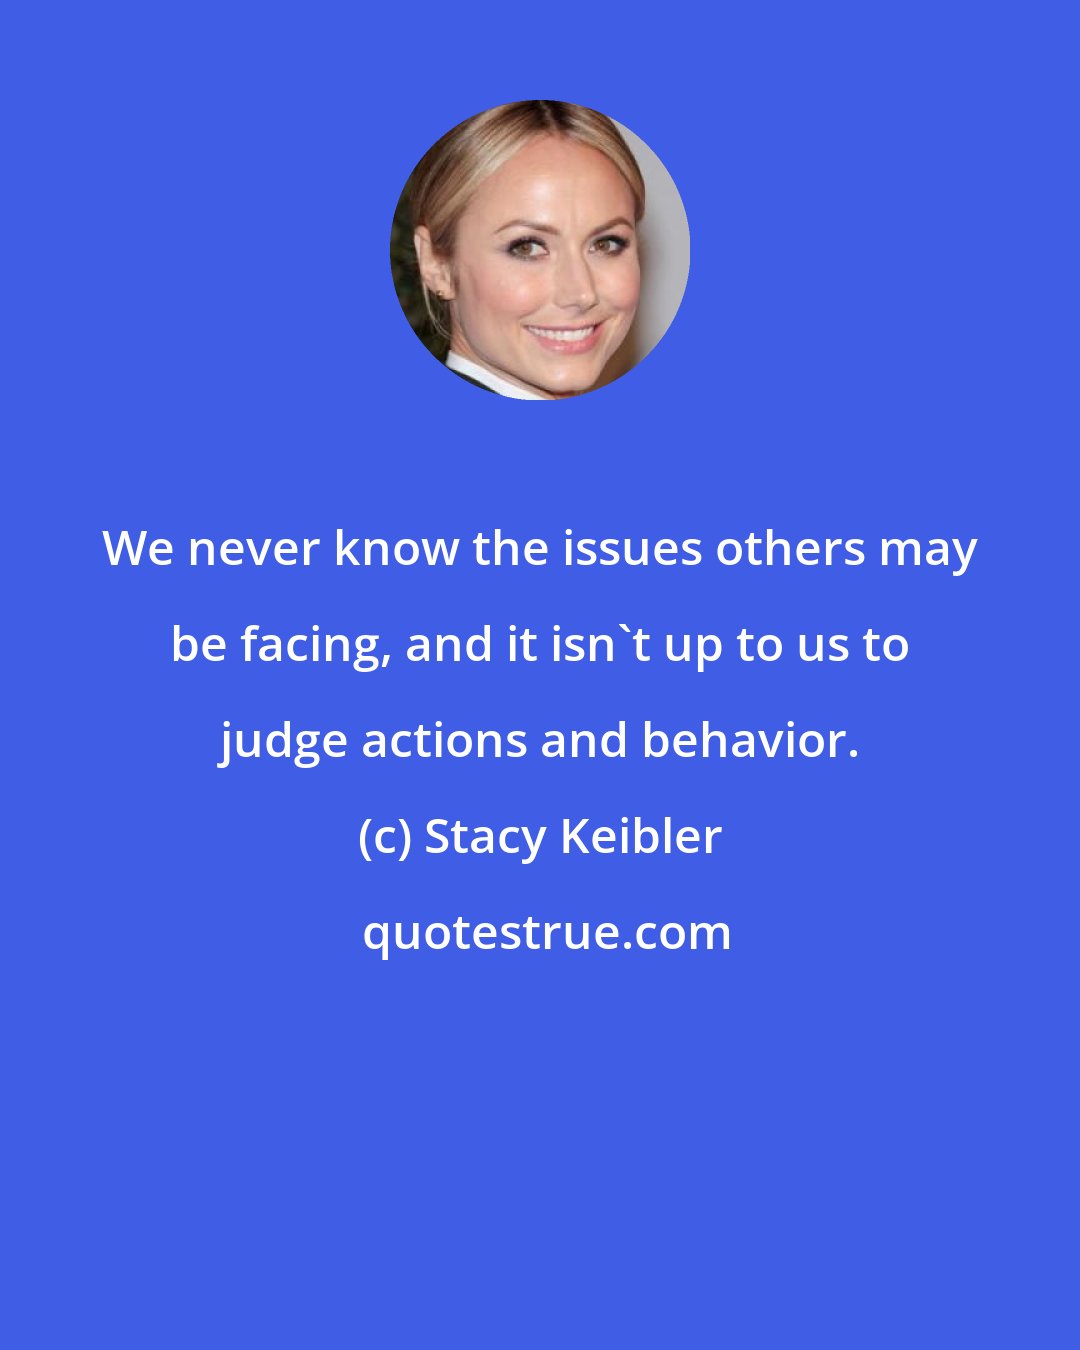 Stacy Keibler: We never know the issues others may be facing, and it isn't up to us to judge actions and behavior.